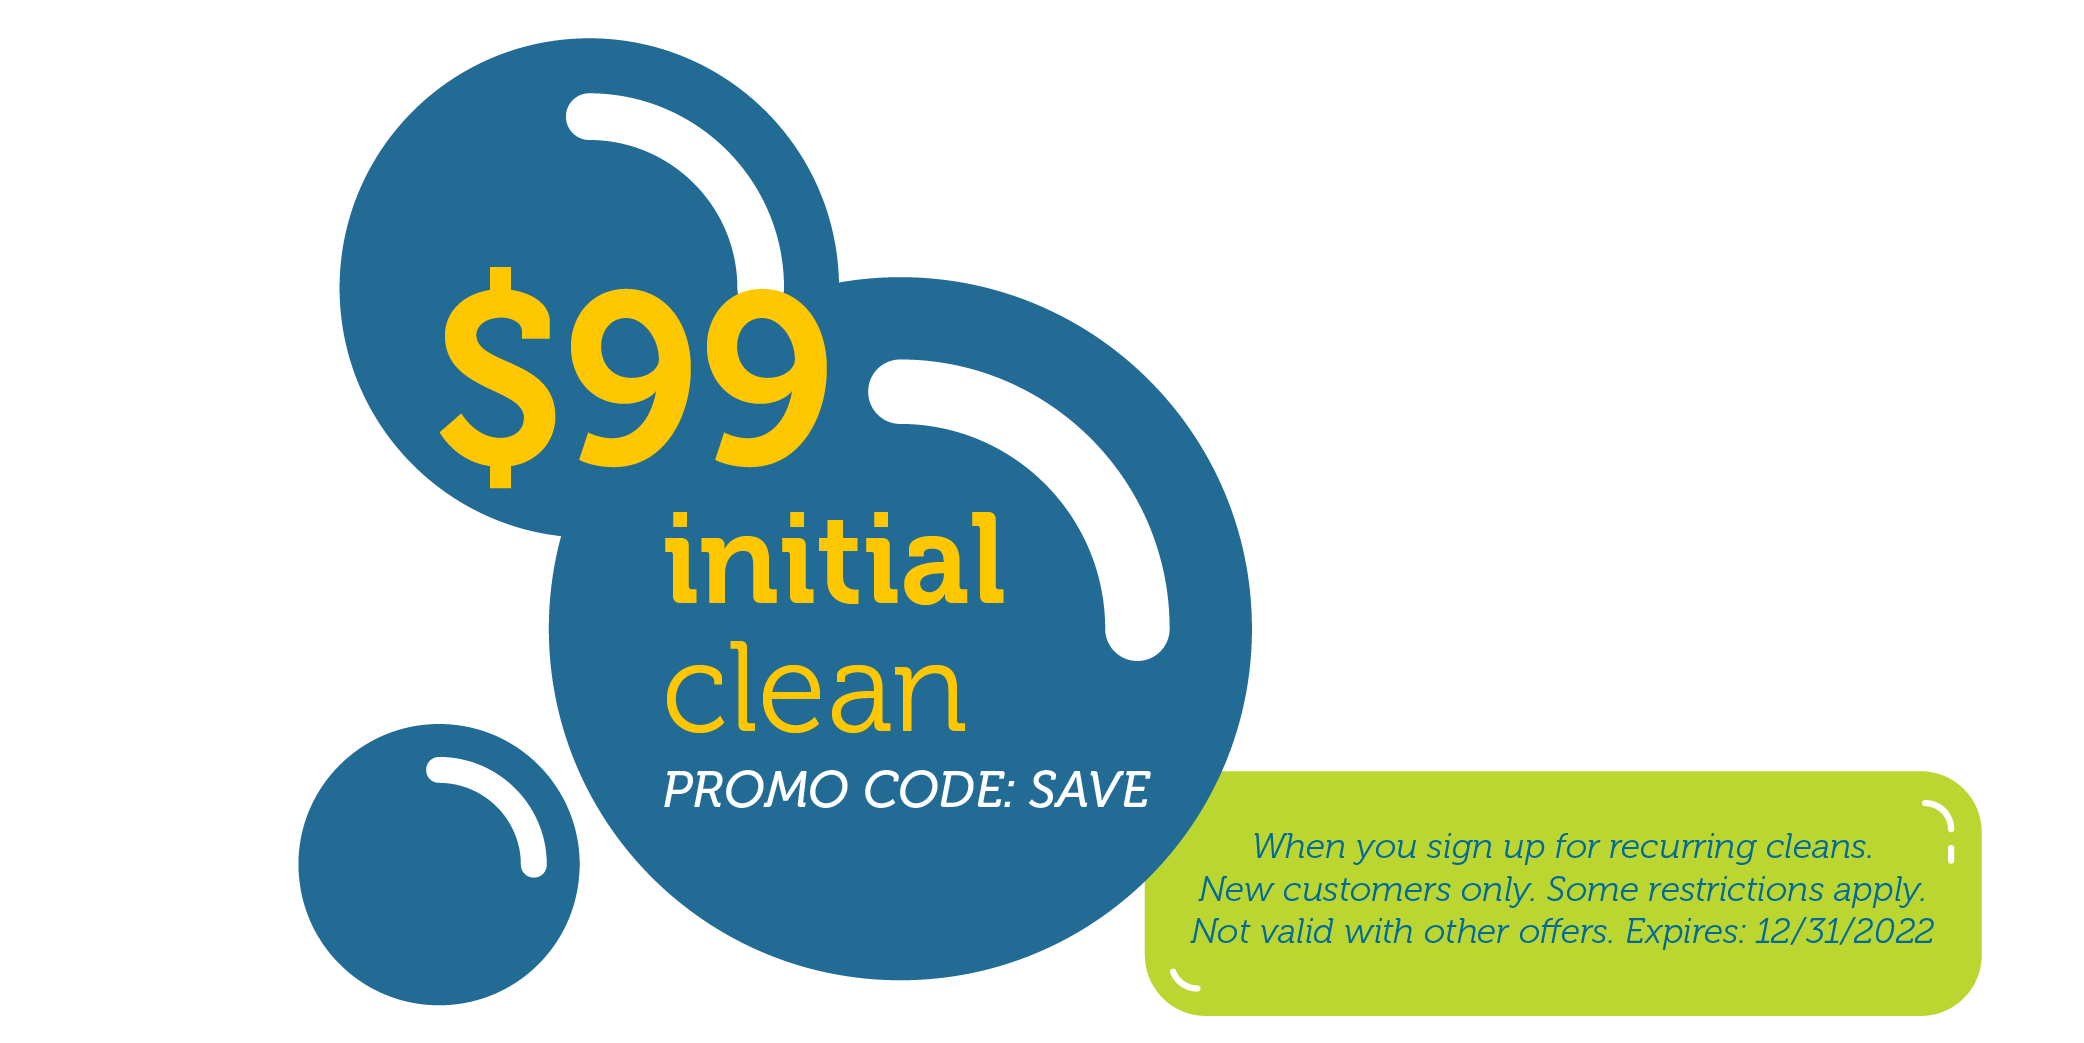 $99 Initial Clean Website Offer